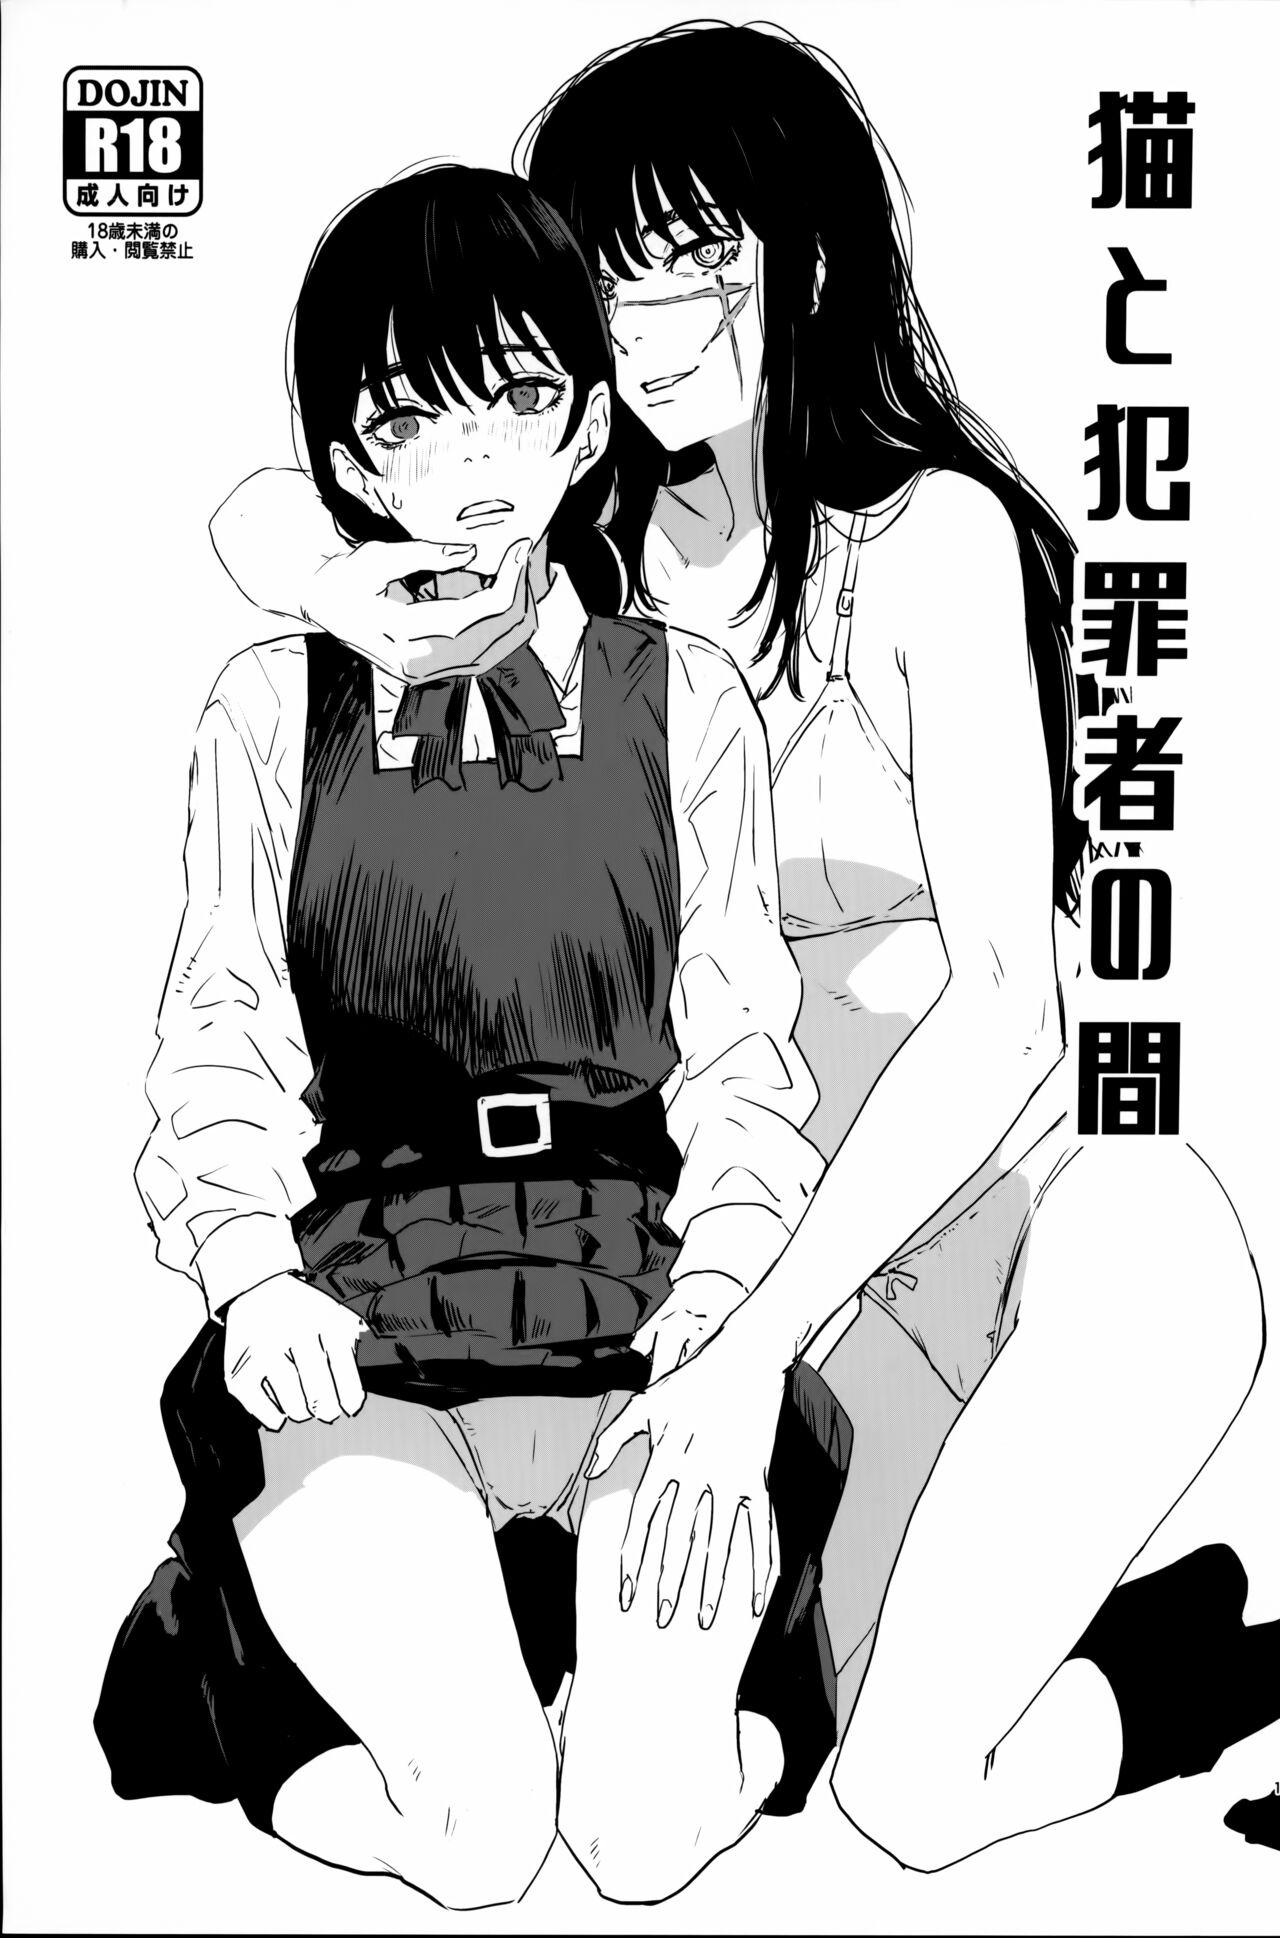 Gayemo 猫と犯罪者の間 - Chainsaw man Blow Jobs - Page 1